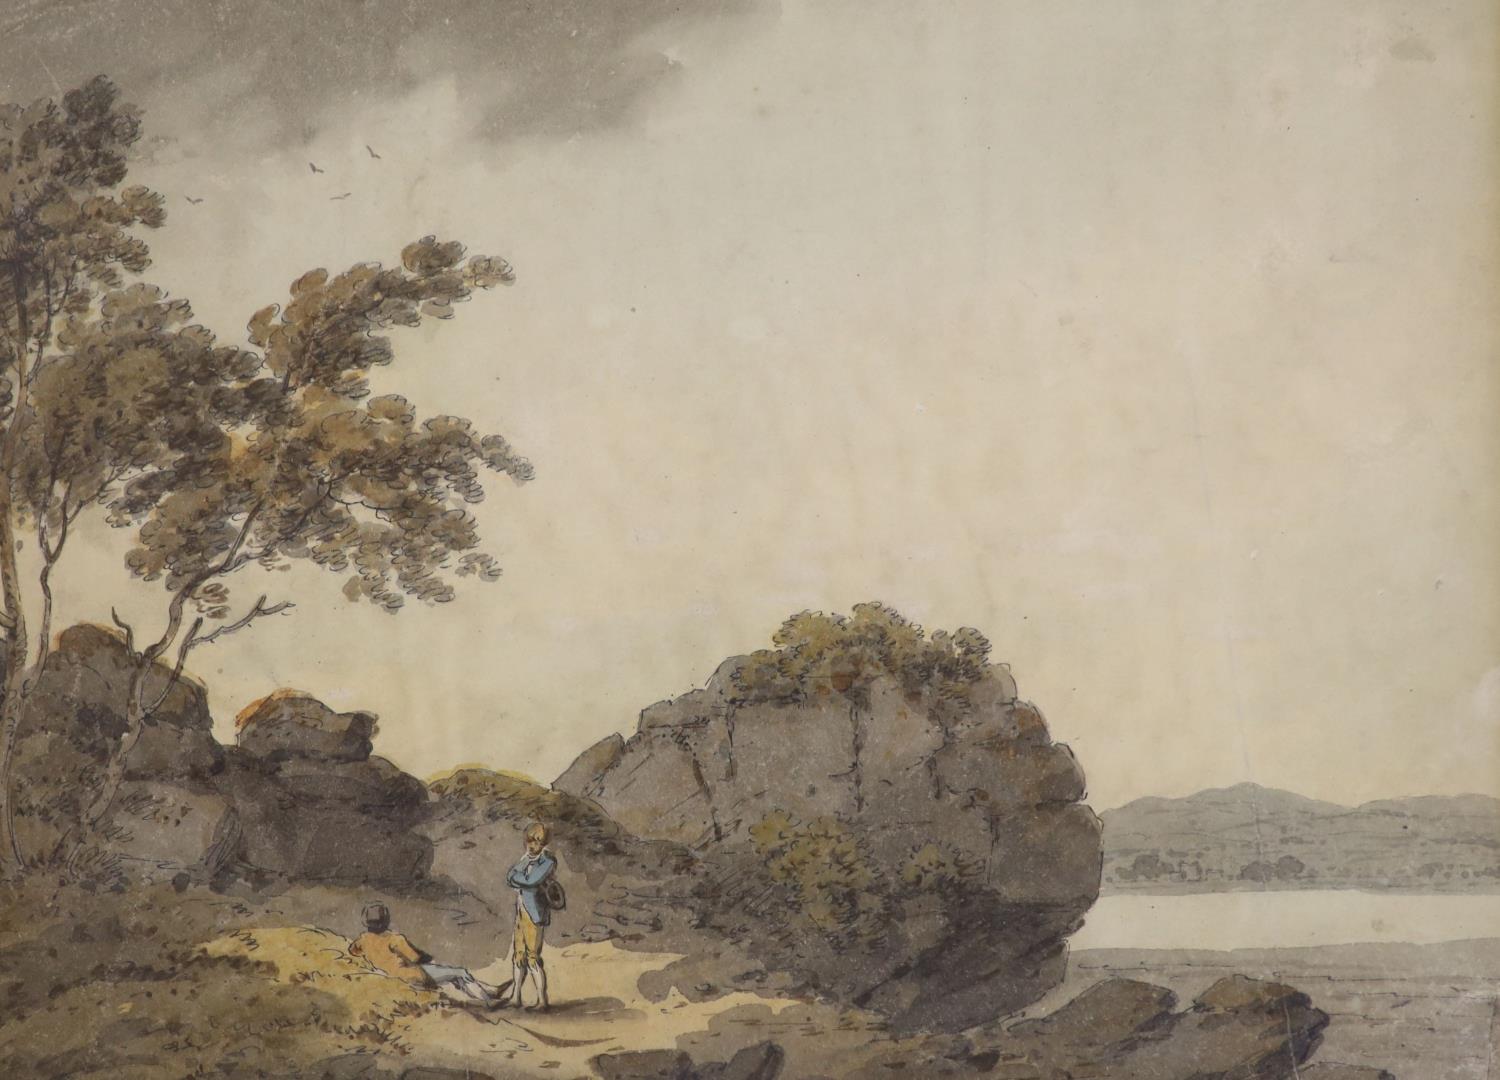 Late 18th century English School, ink and watercolour, Figures in a rocky landscape, 20 x 27cm